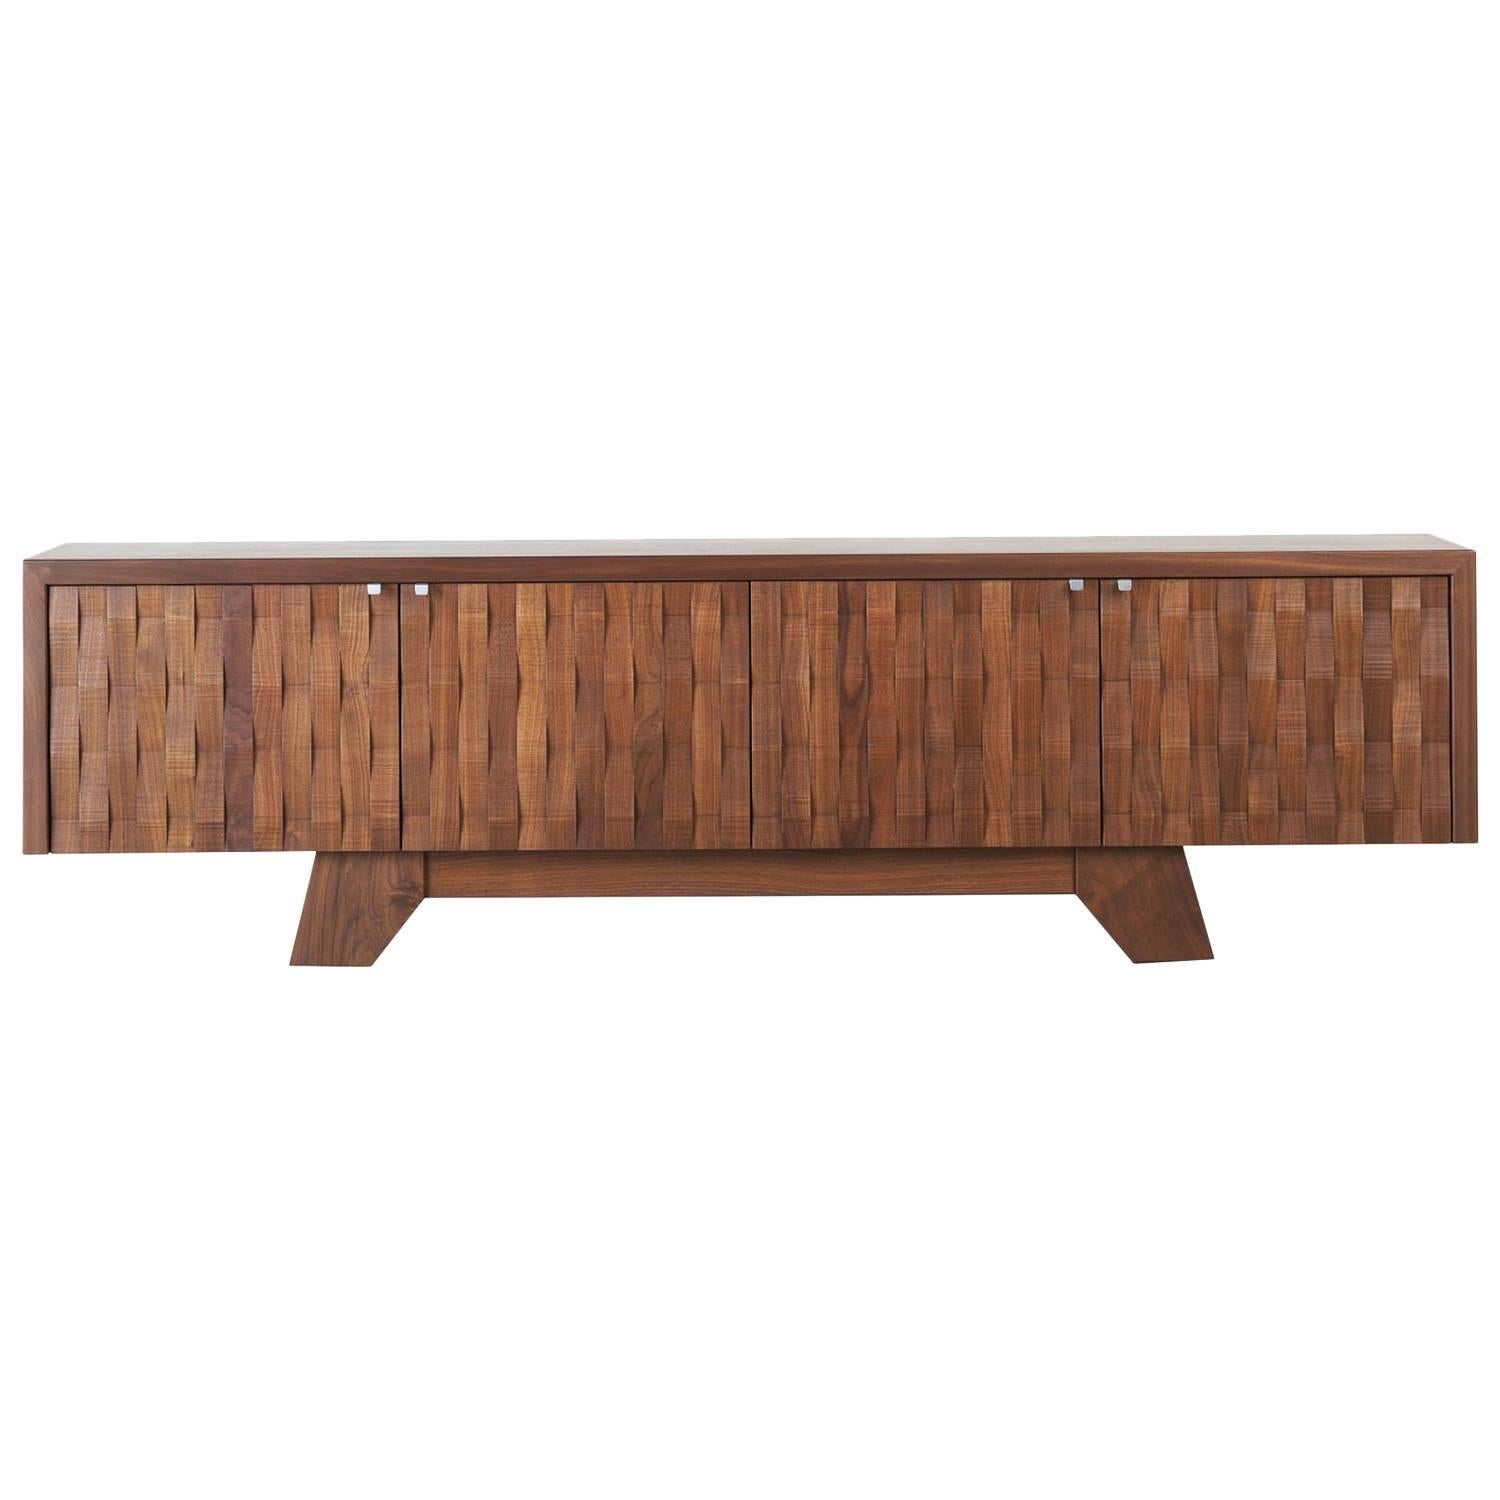 Timber Sidecase, Handcrafted, Modern For Sale